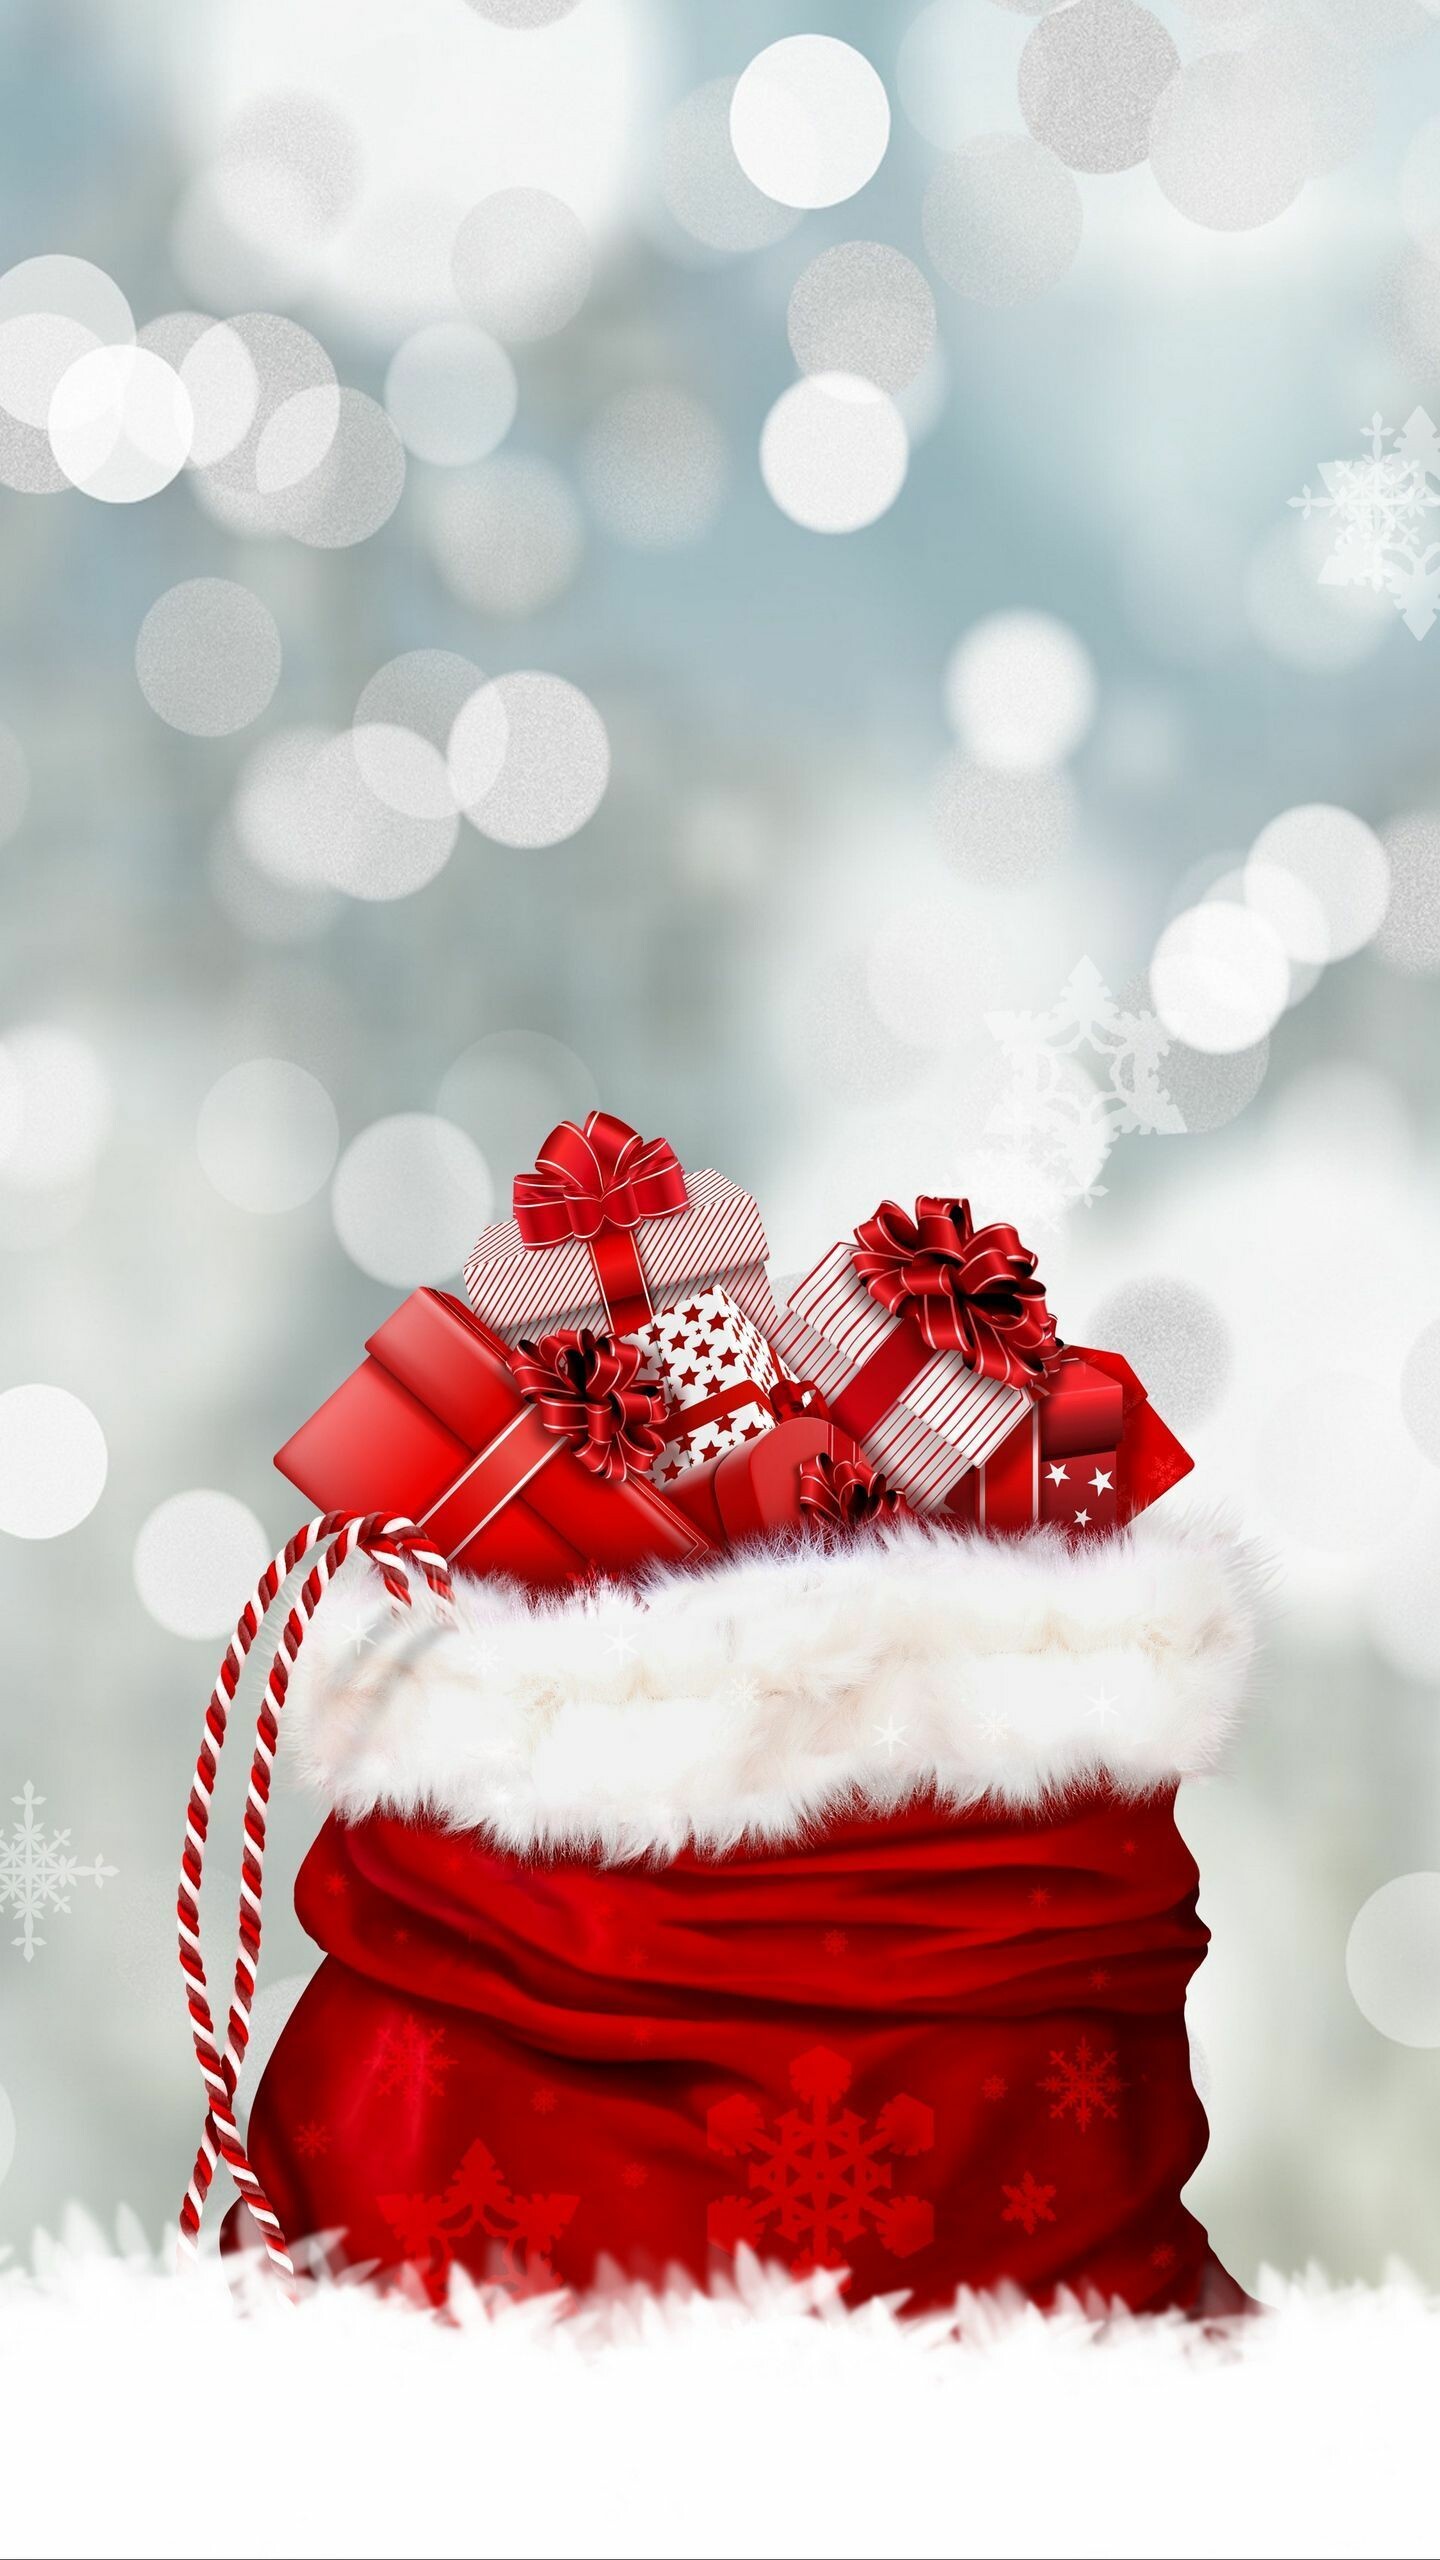 Christmas: A day of gift-giving, 25 December, A Christian holiday. 1440x2560 HD Background.